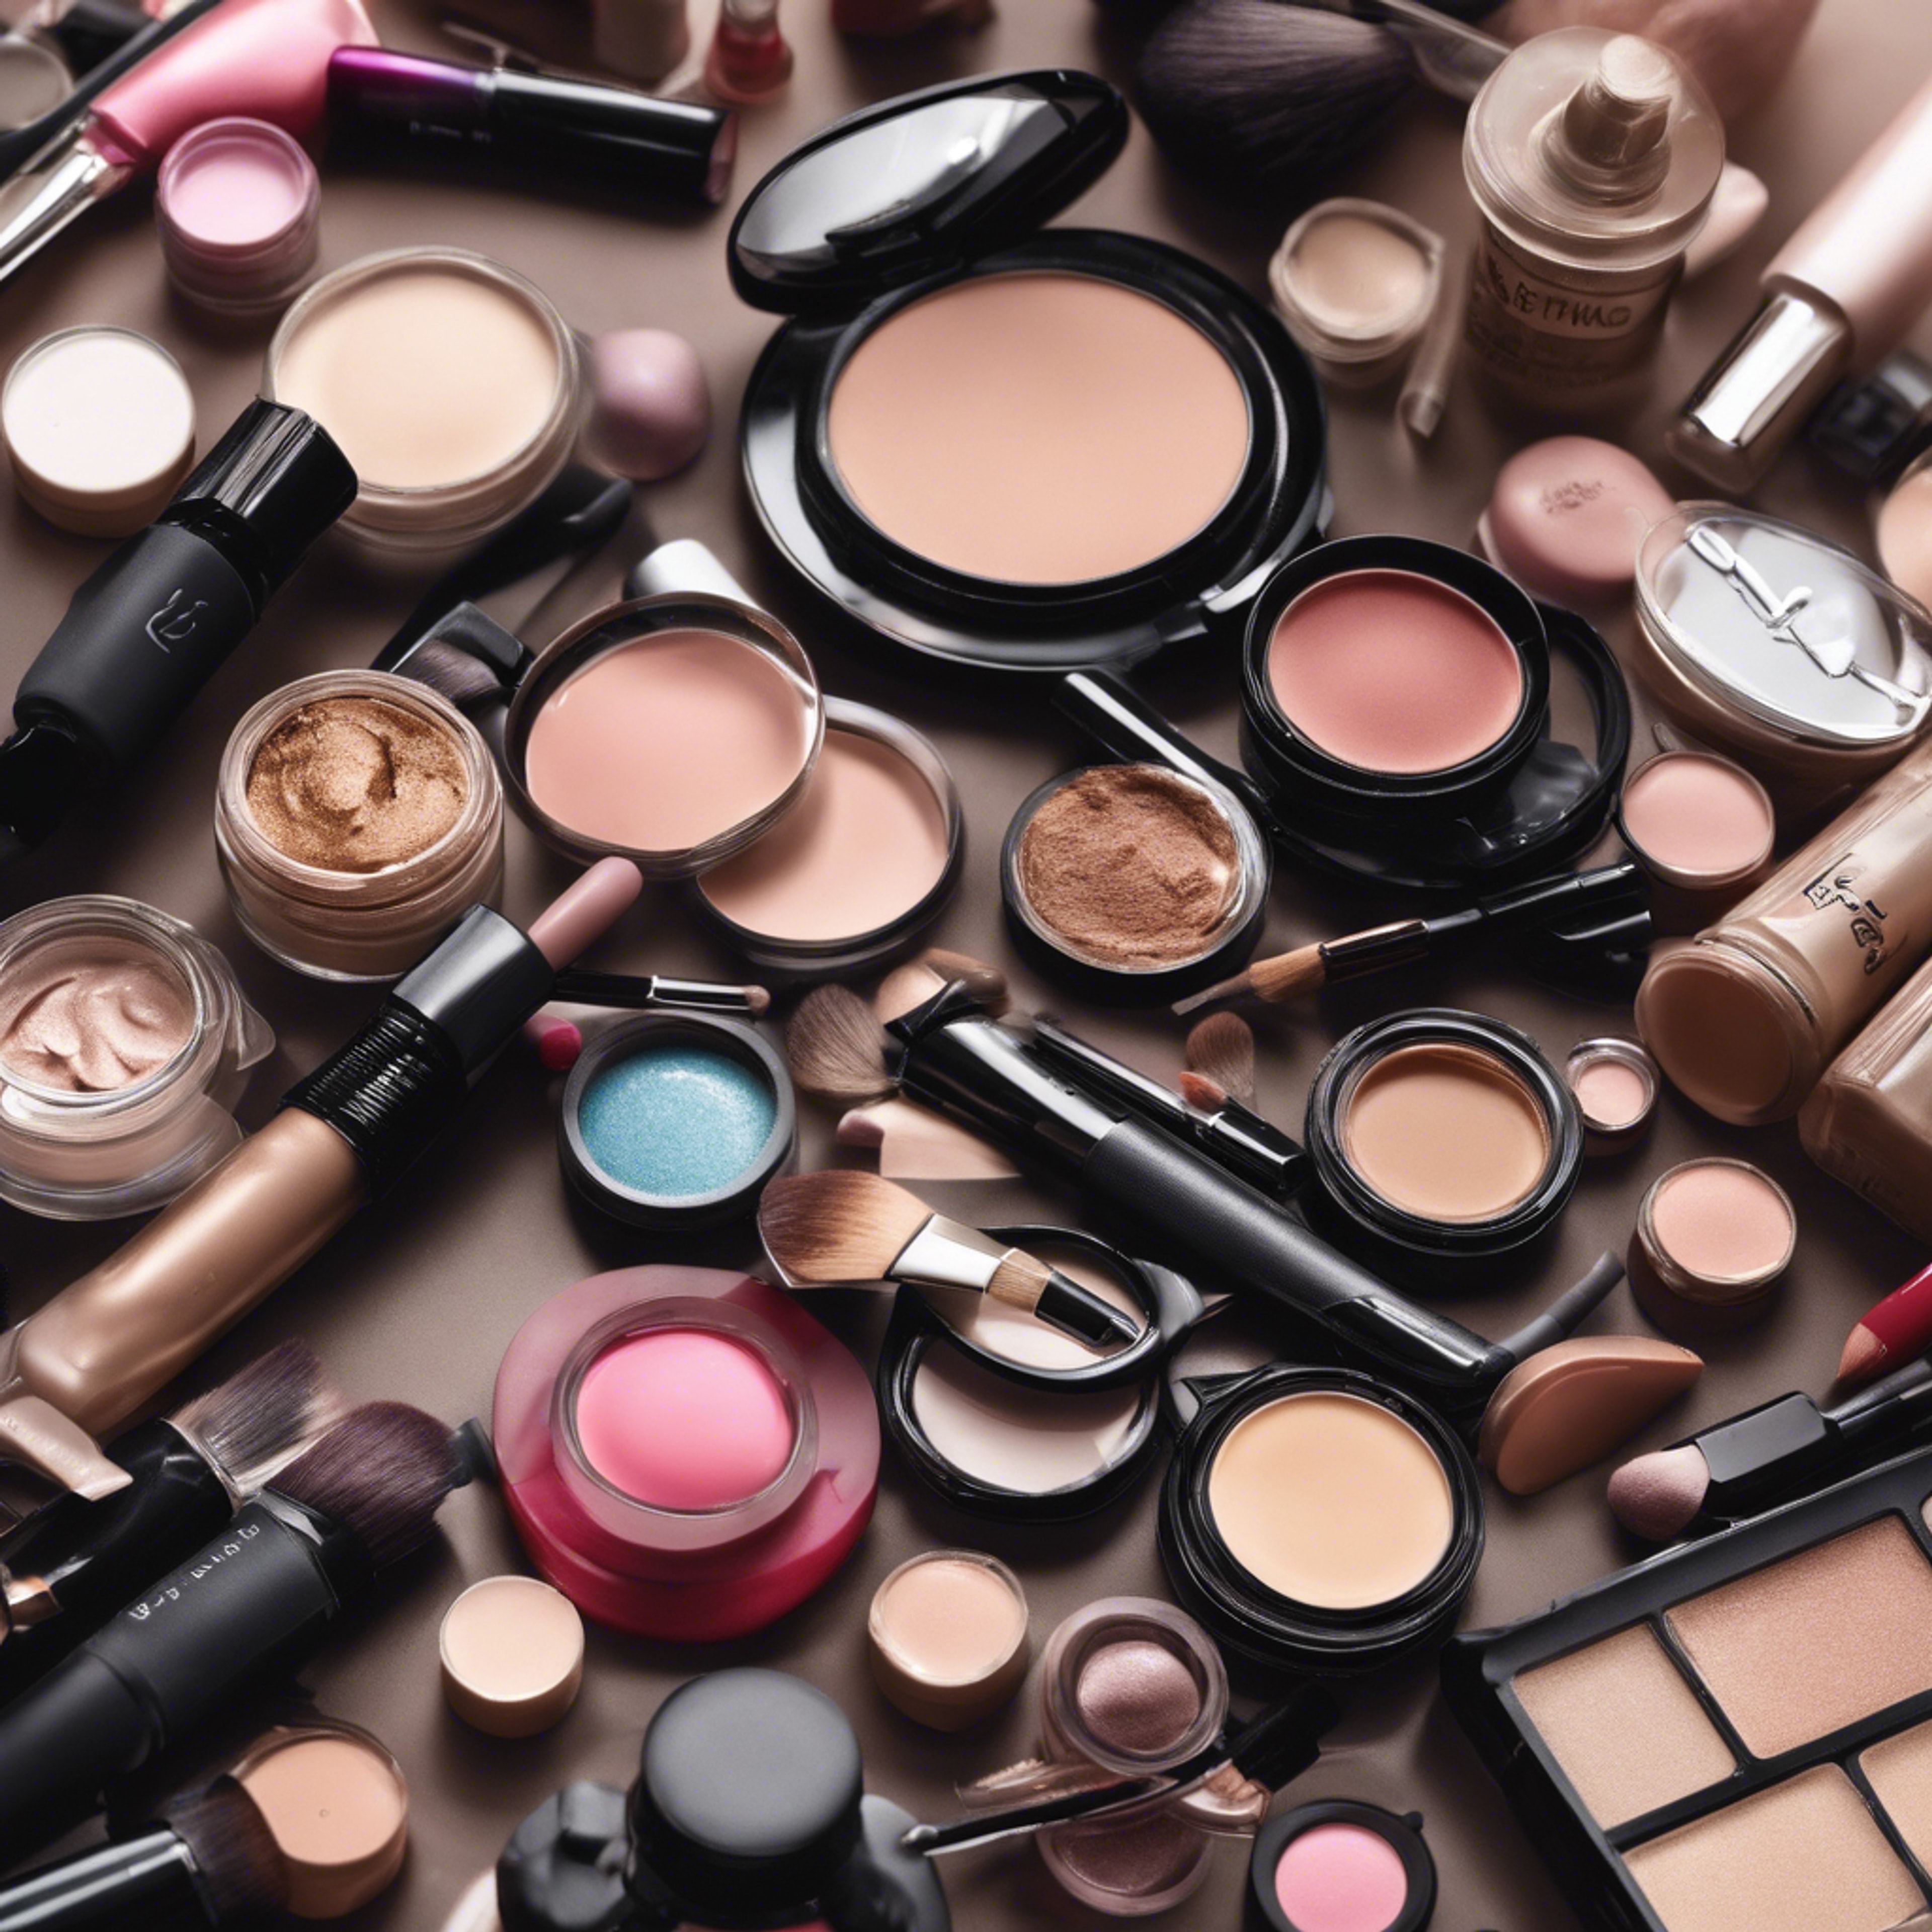 A makeup artist's table crowded with various brands of cosmetics ranging from foundation to lip gloss. Wallpaper[1b8937cb2e6649abadfd]